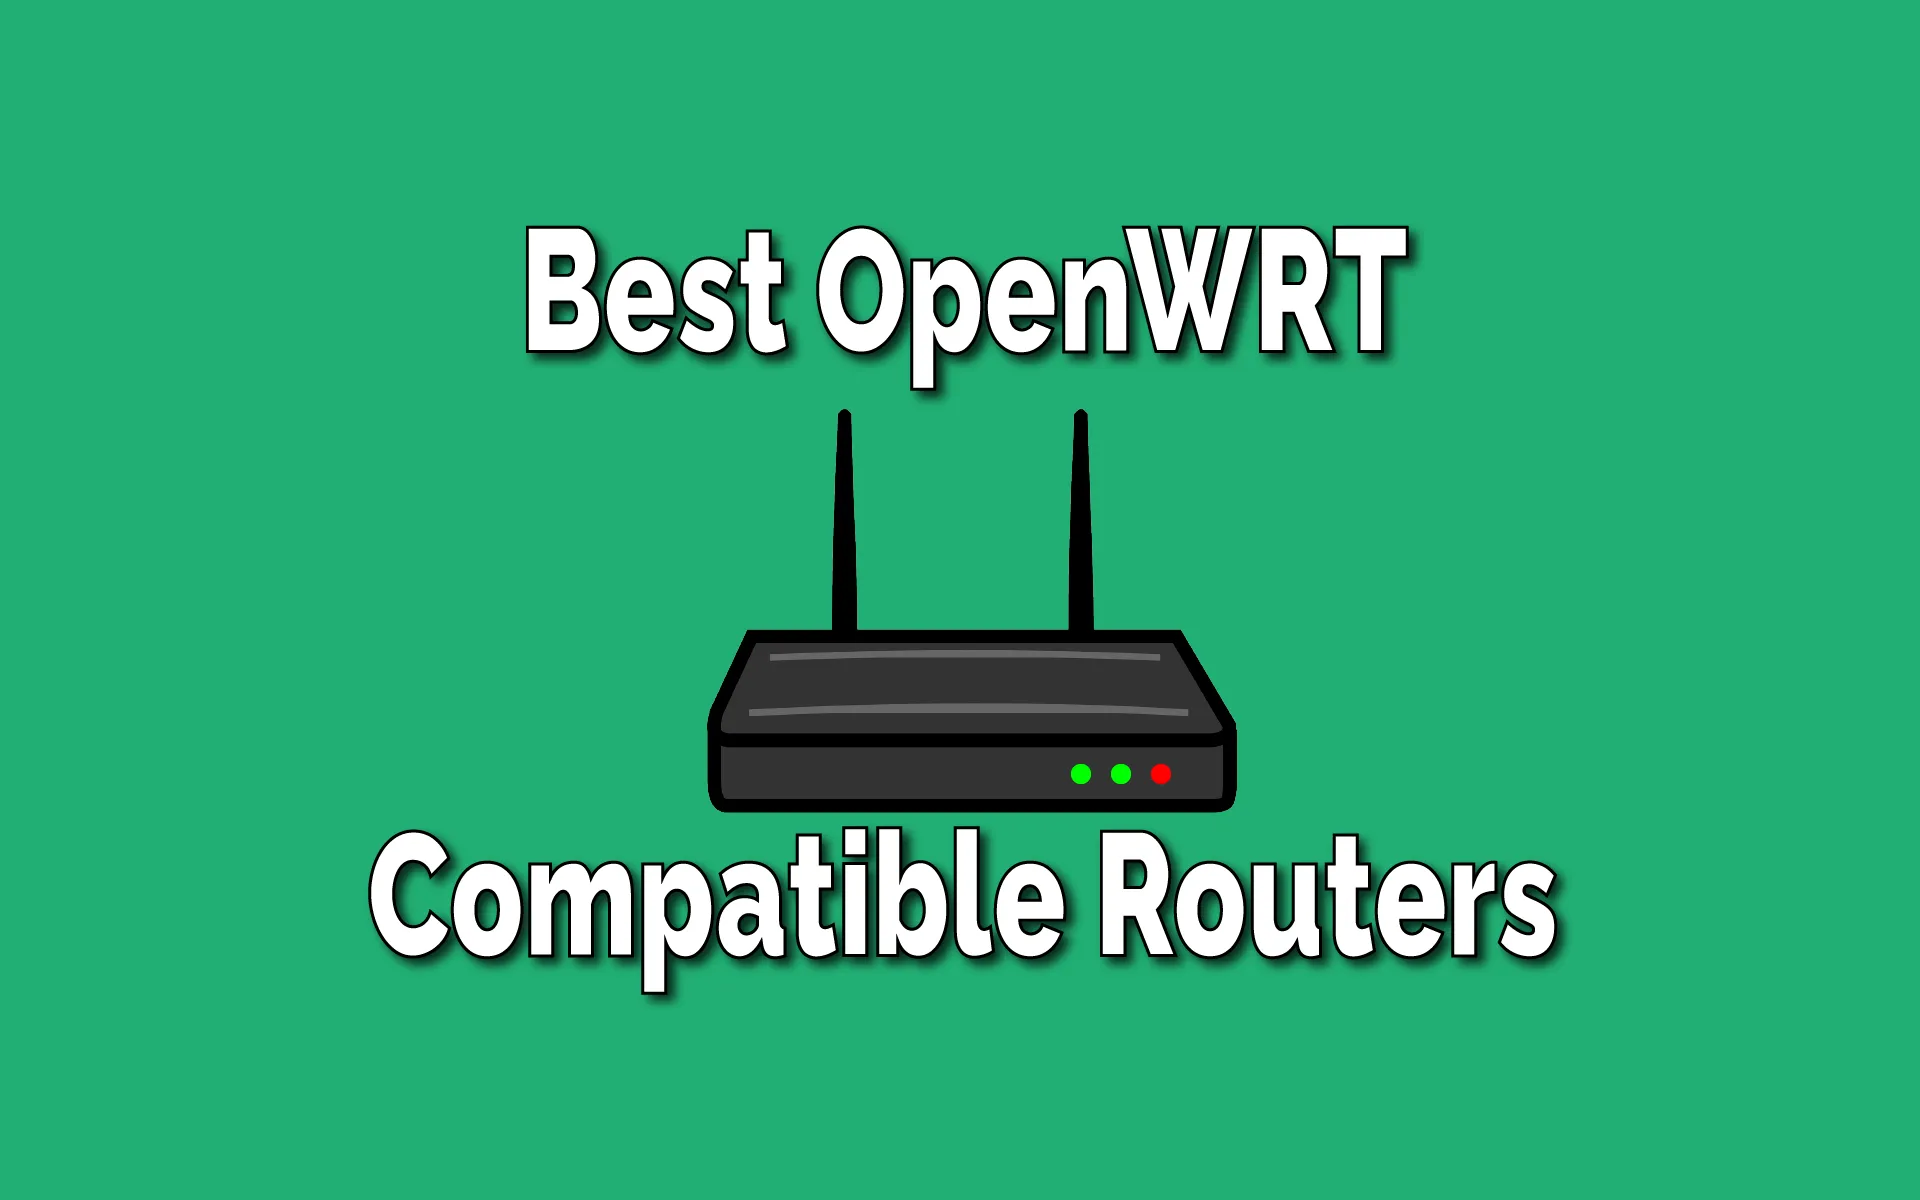 Best OpenWRT routers